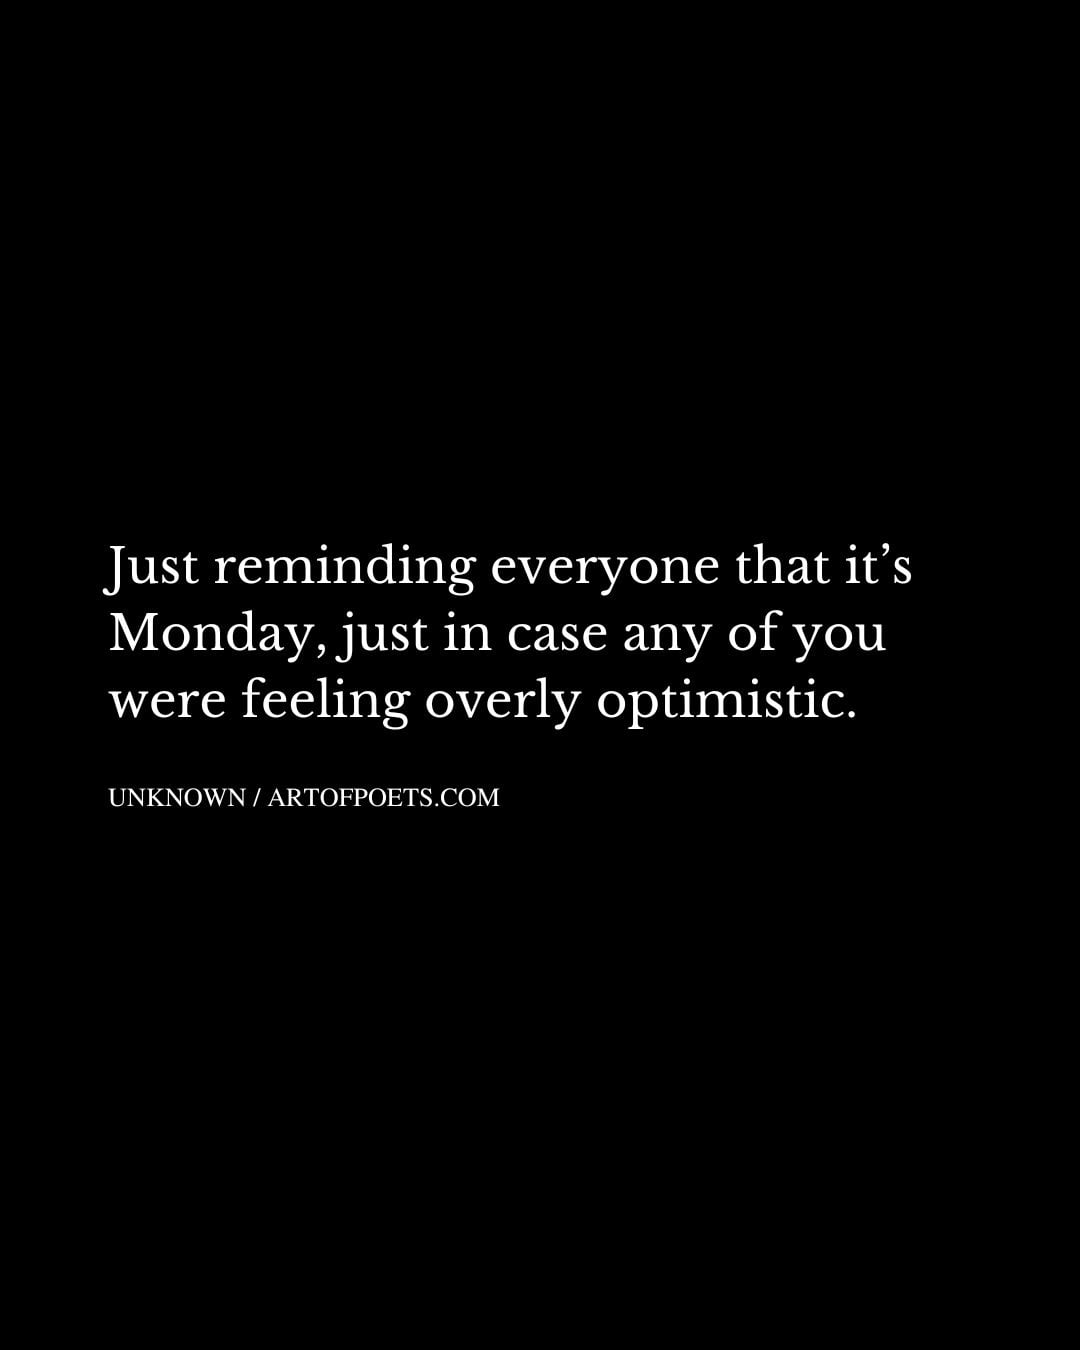 Just reminding everyone that its Monday just in case any of you were feeling overly optimistic